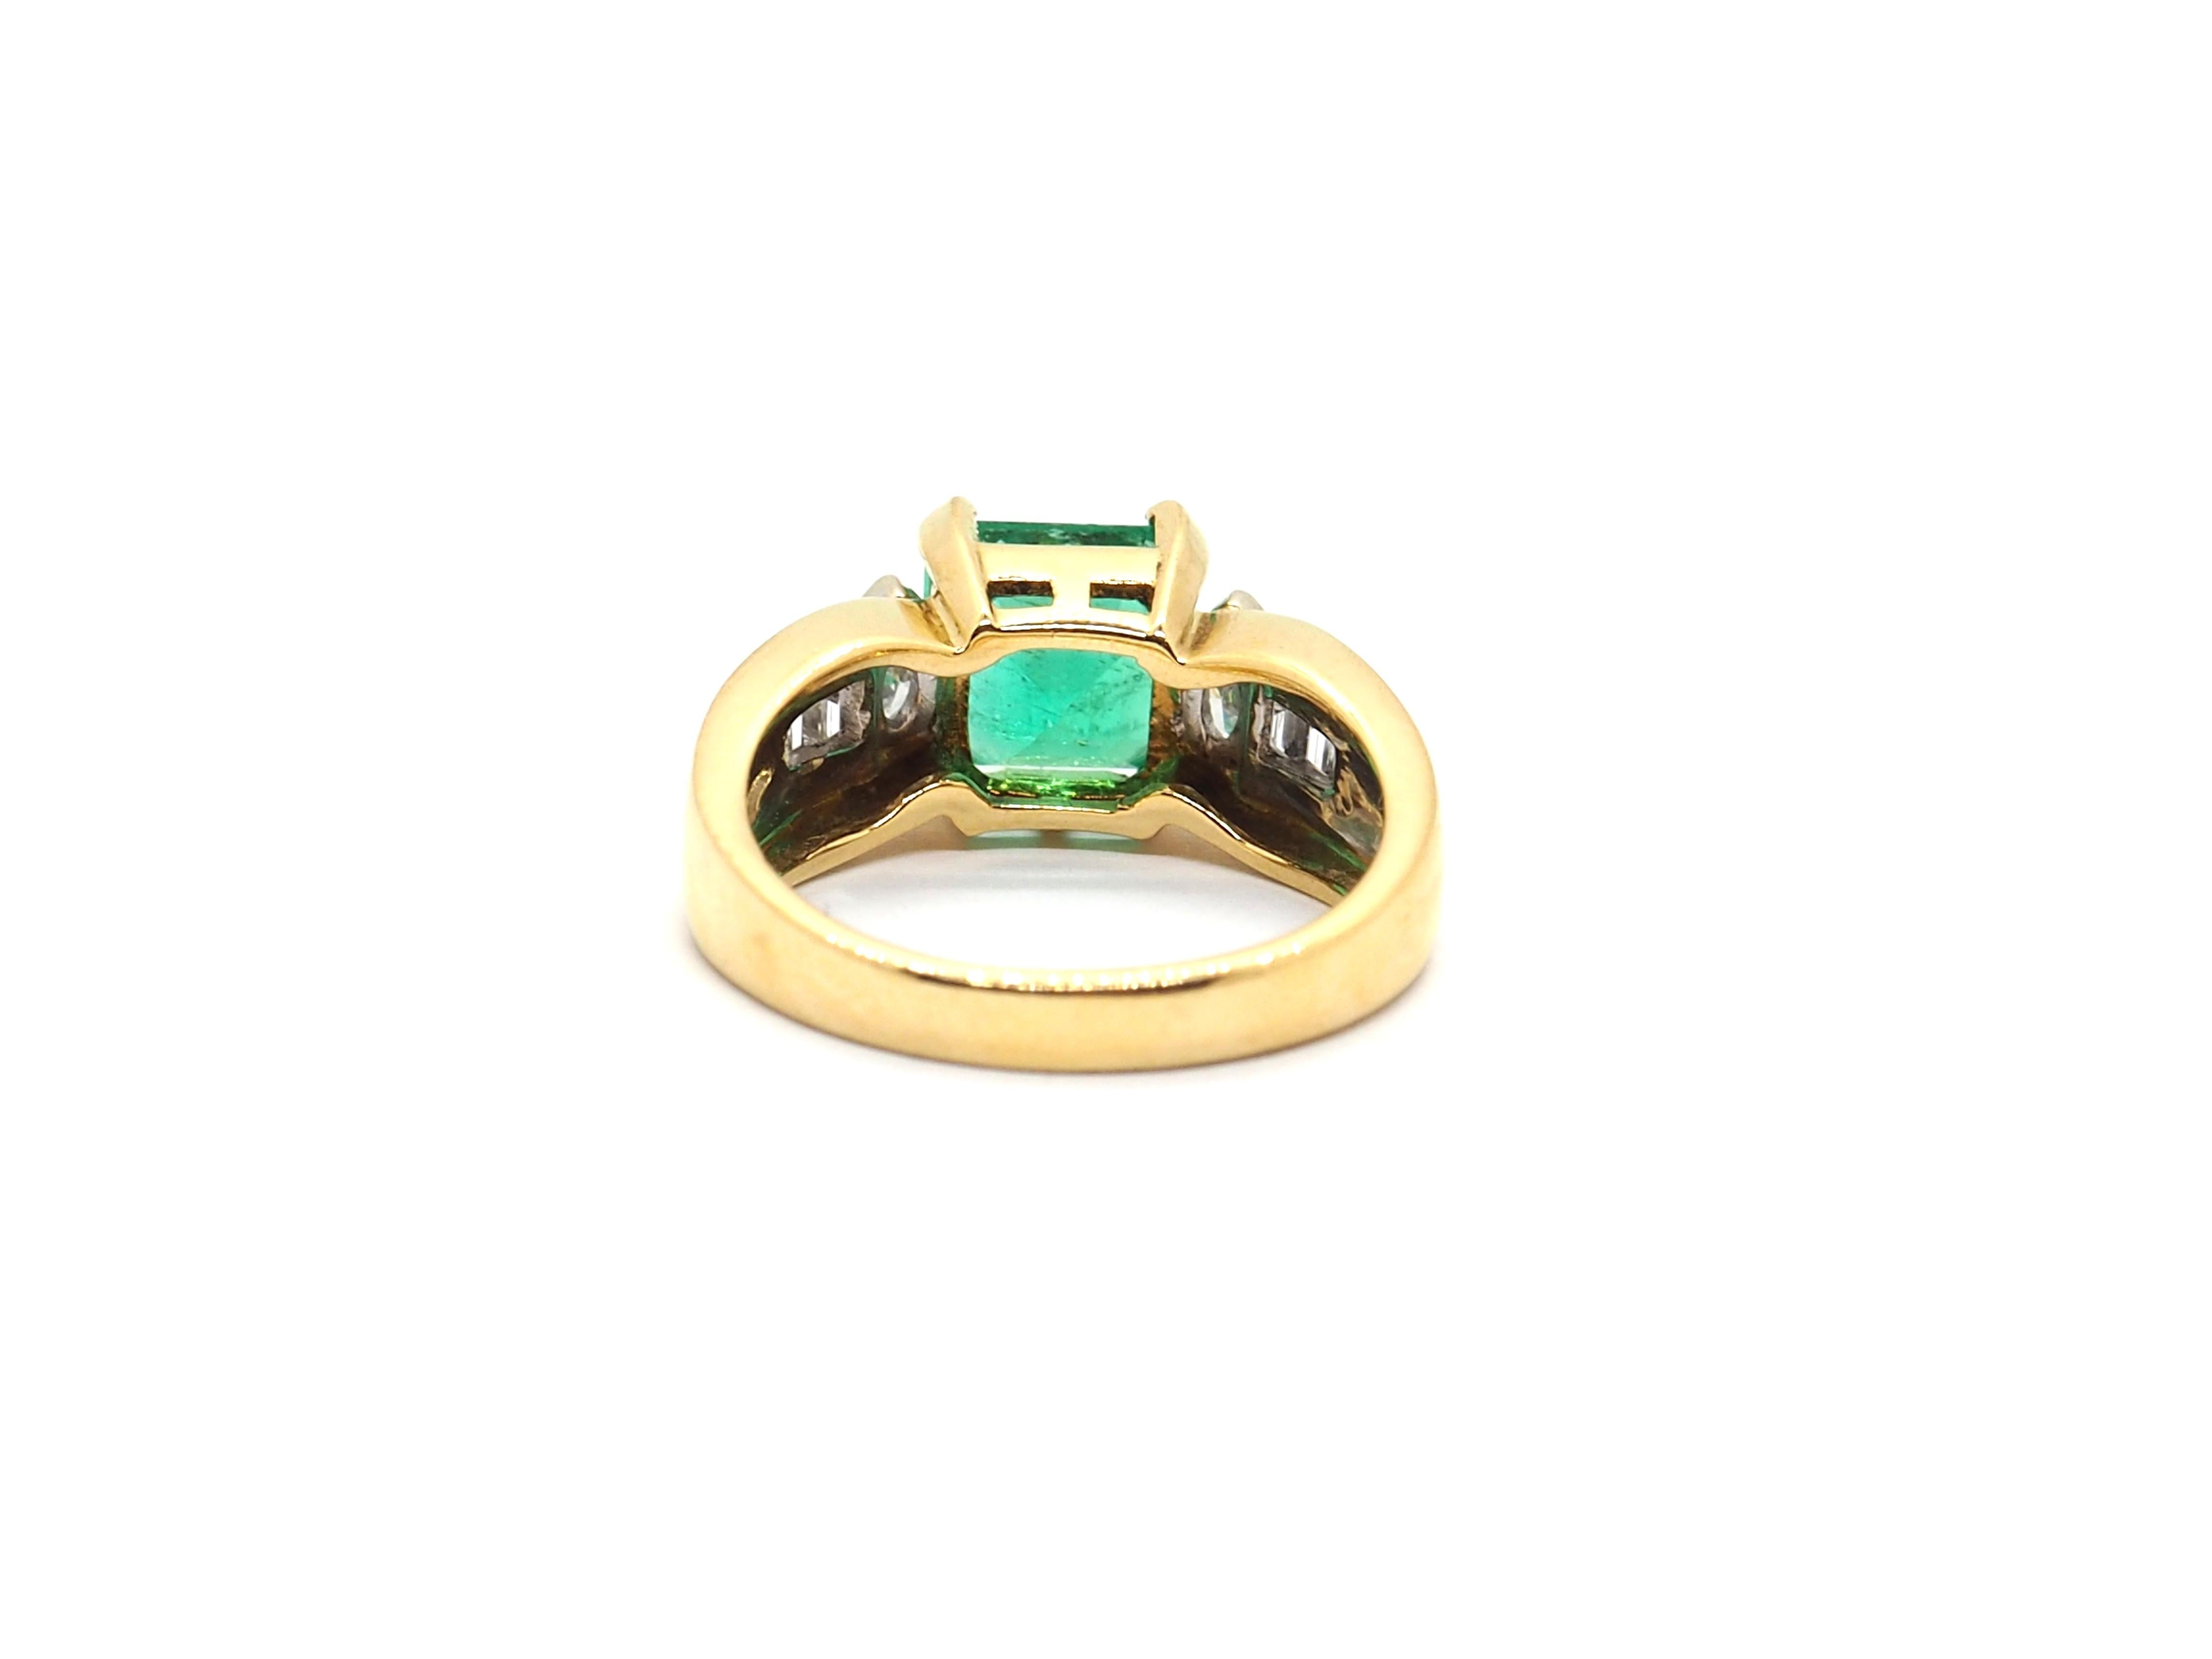 18K Gold ring with Princes cut natural Colombian Emerald  approximated 2.3 CTS  surrounded by 4 round shape  and 6 baguette diamonds, with total 0.5 CTS  

Total weight 6.7g
Eu Size: 53 

The ring comes with our certificate and a presentation